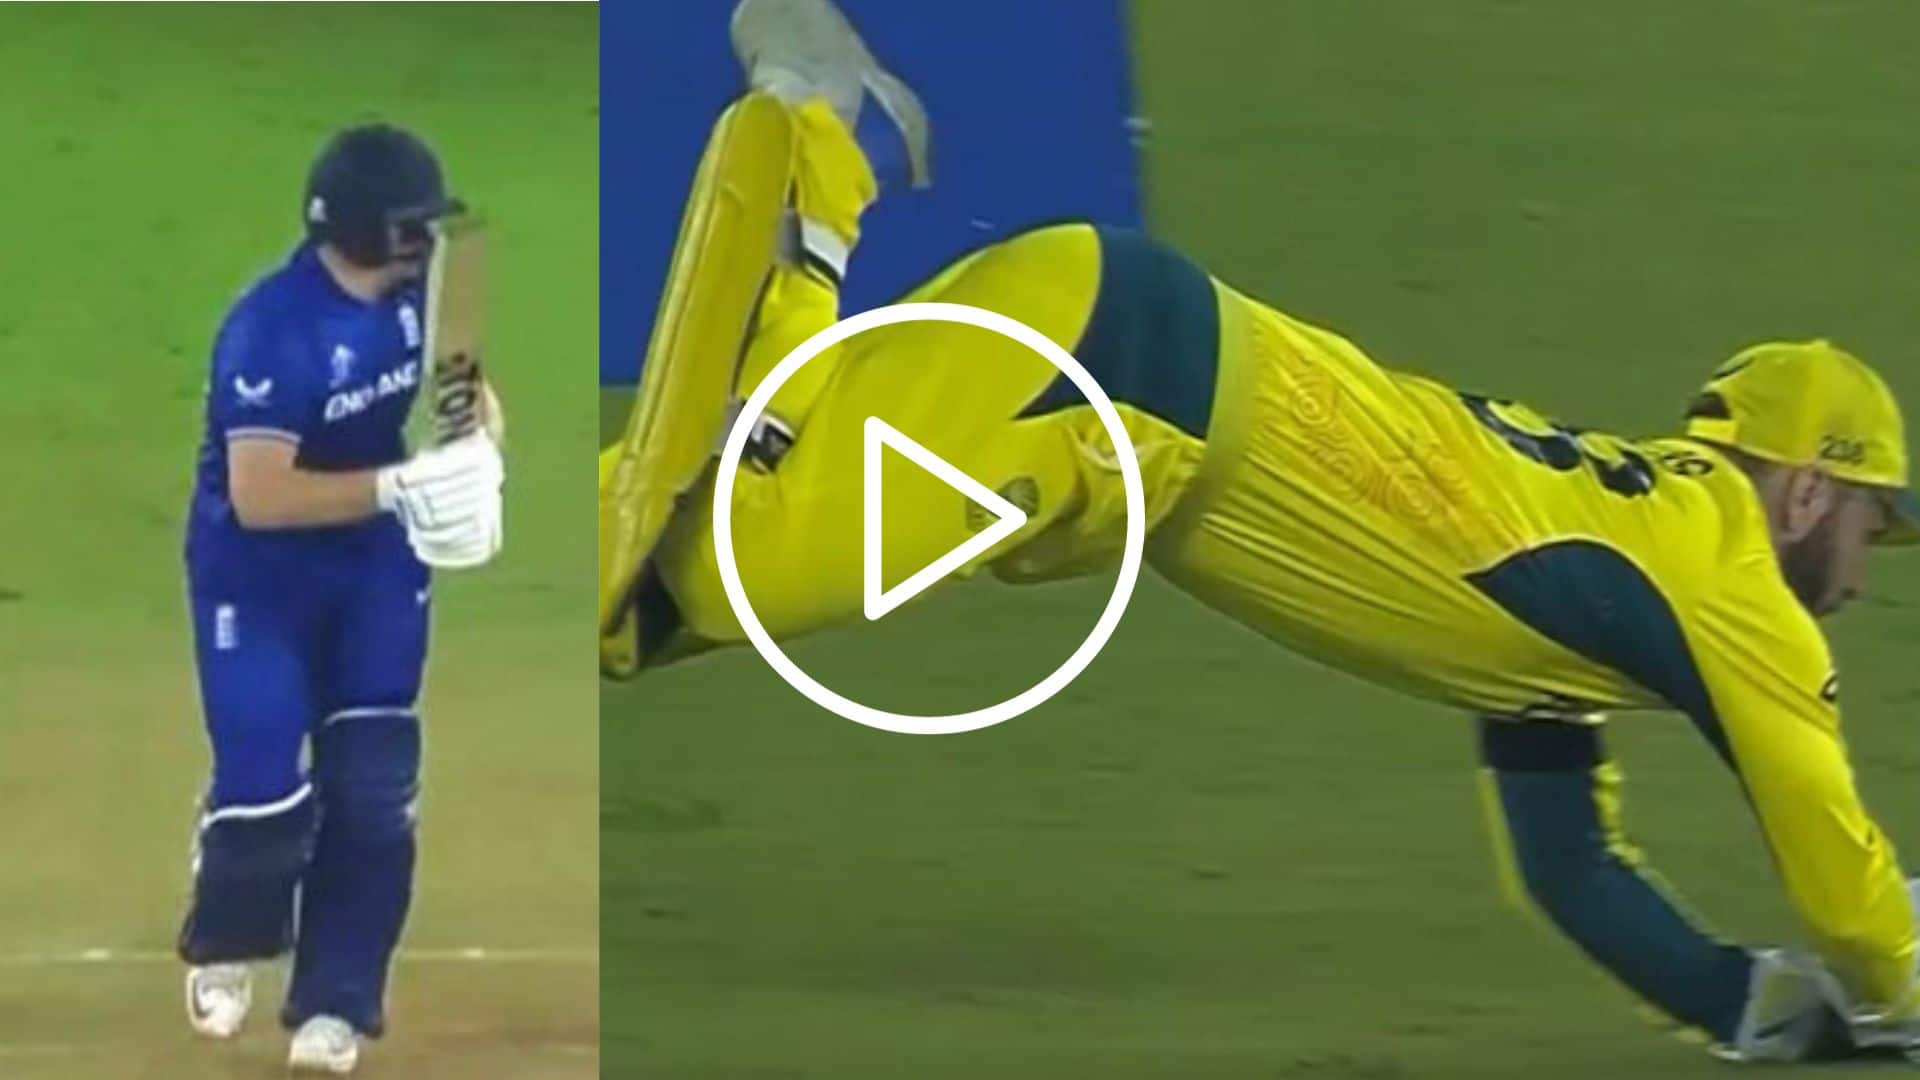 [Watch] Starc's Killer Pace, Inglis' Flying Catch Sends Bairstow Back For A Golden Duck